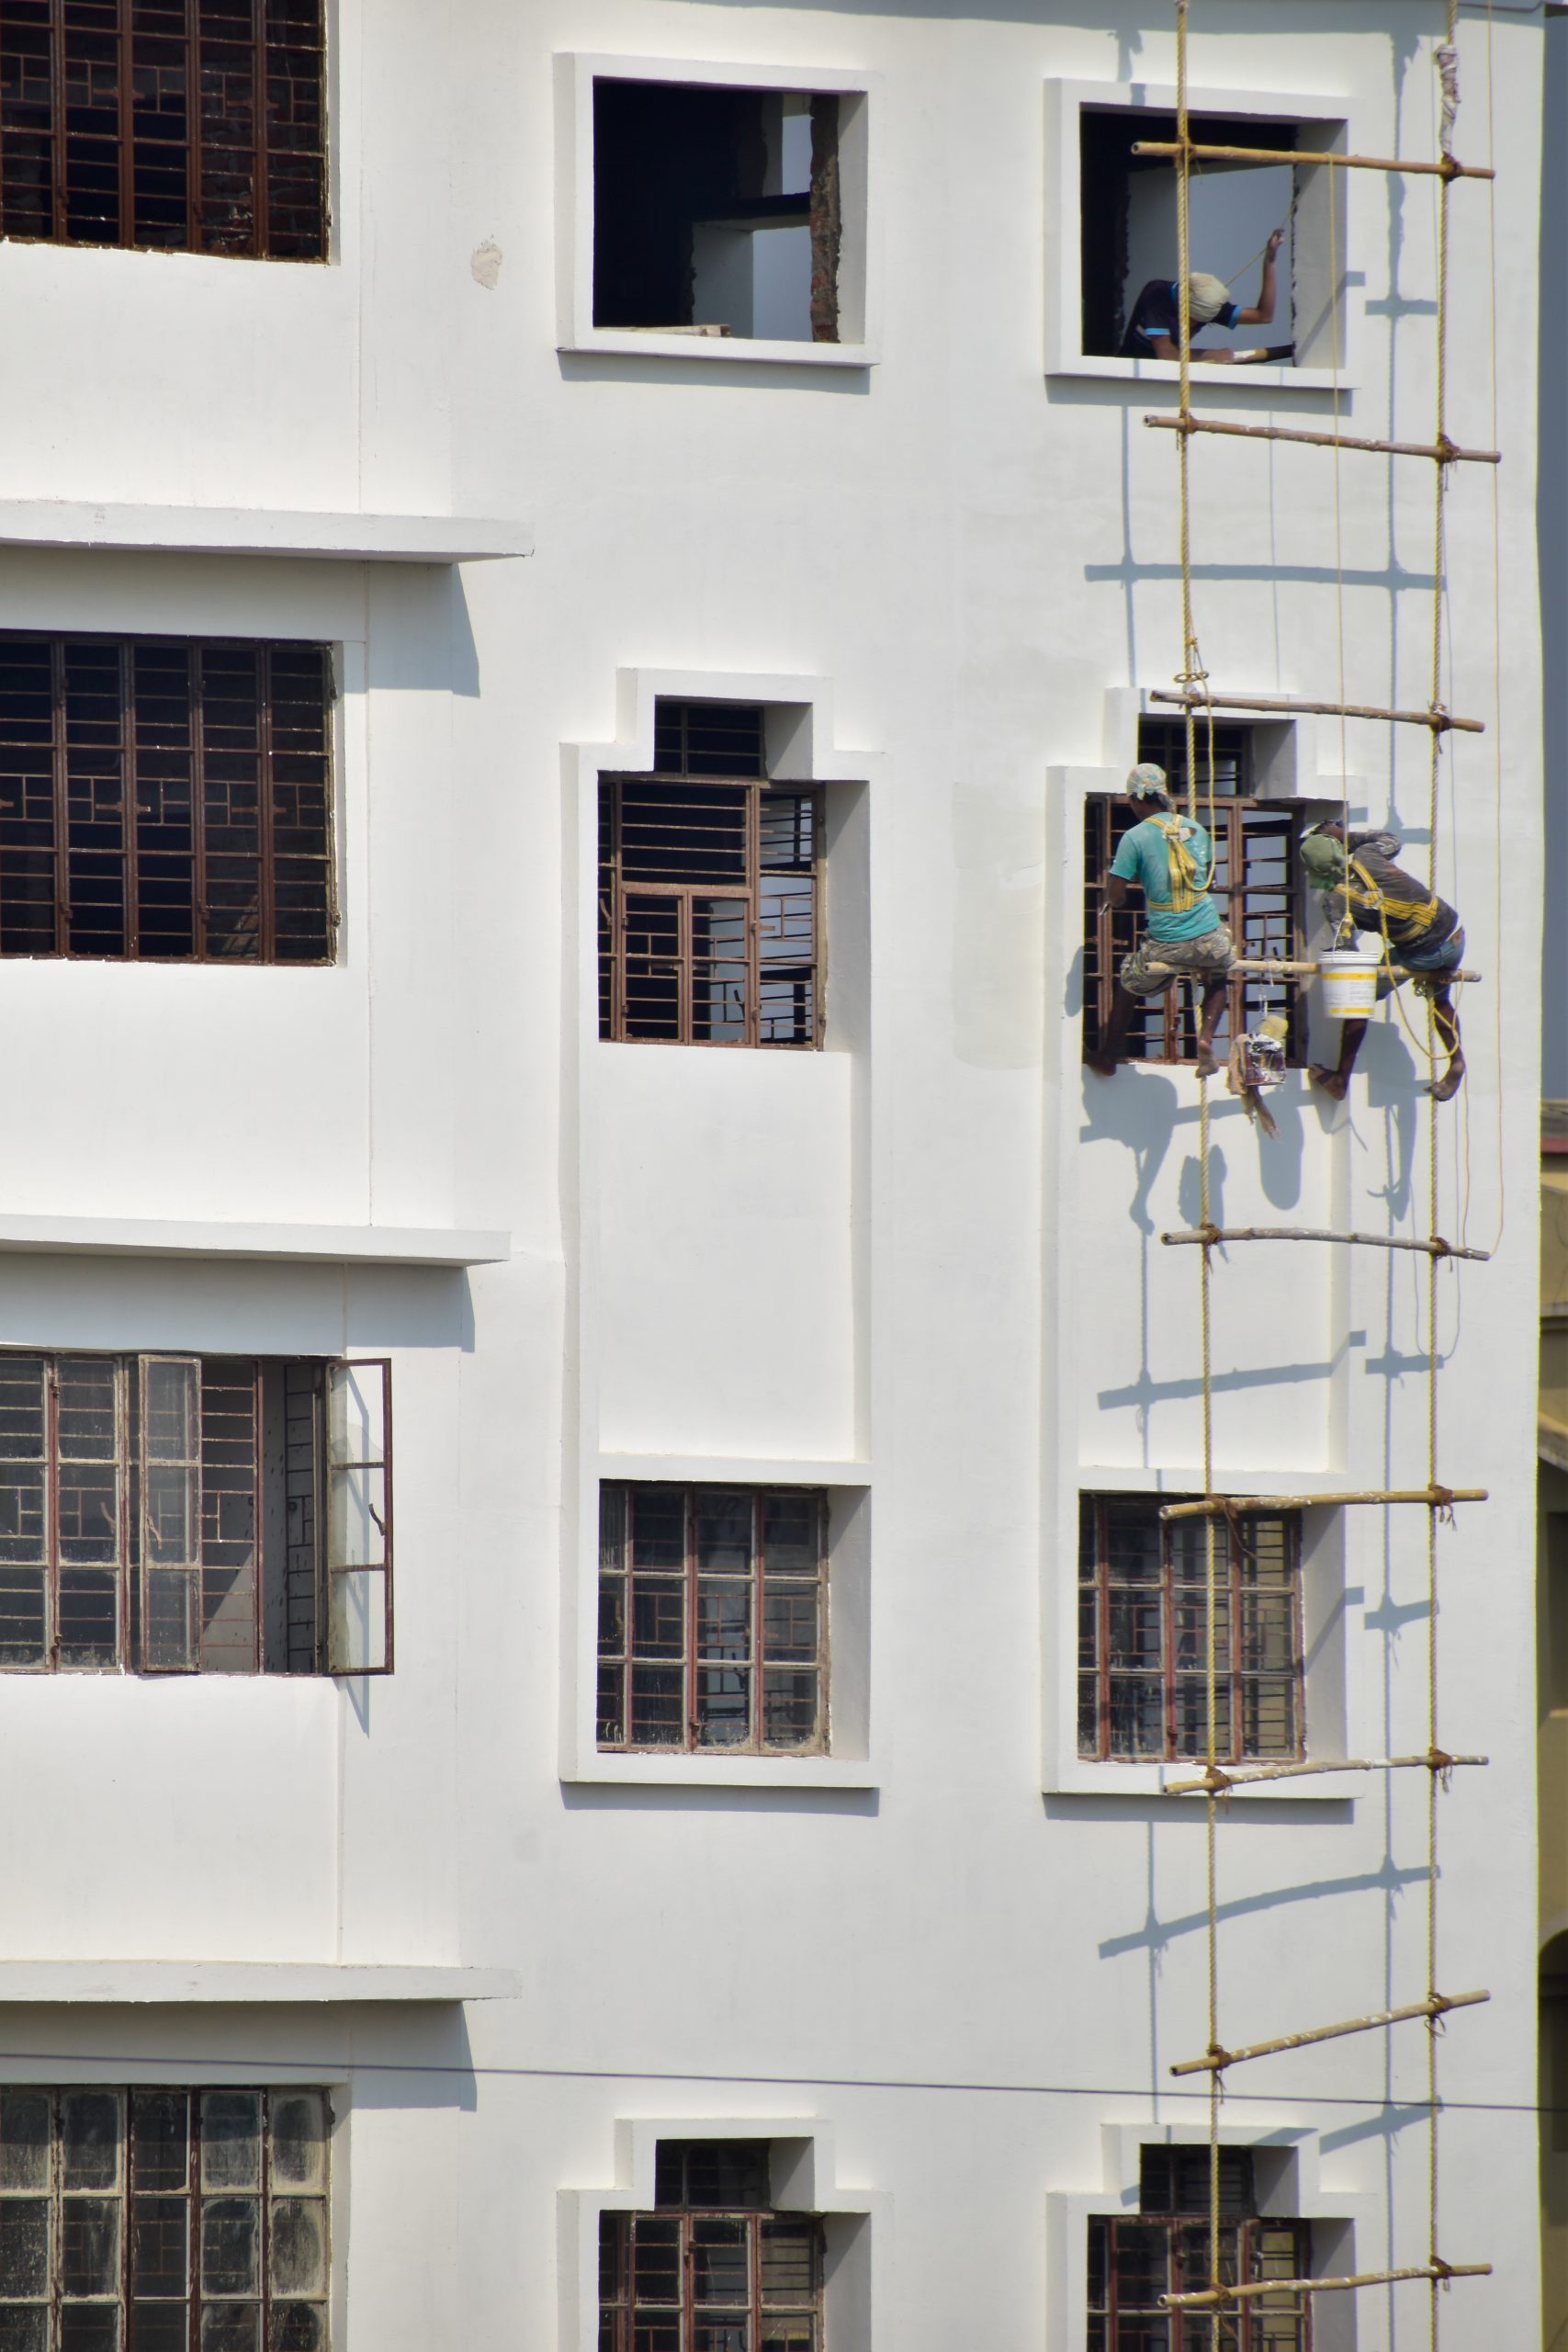 Painter Painting a Building